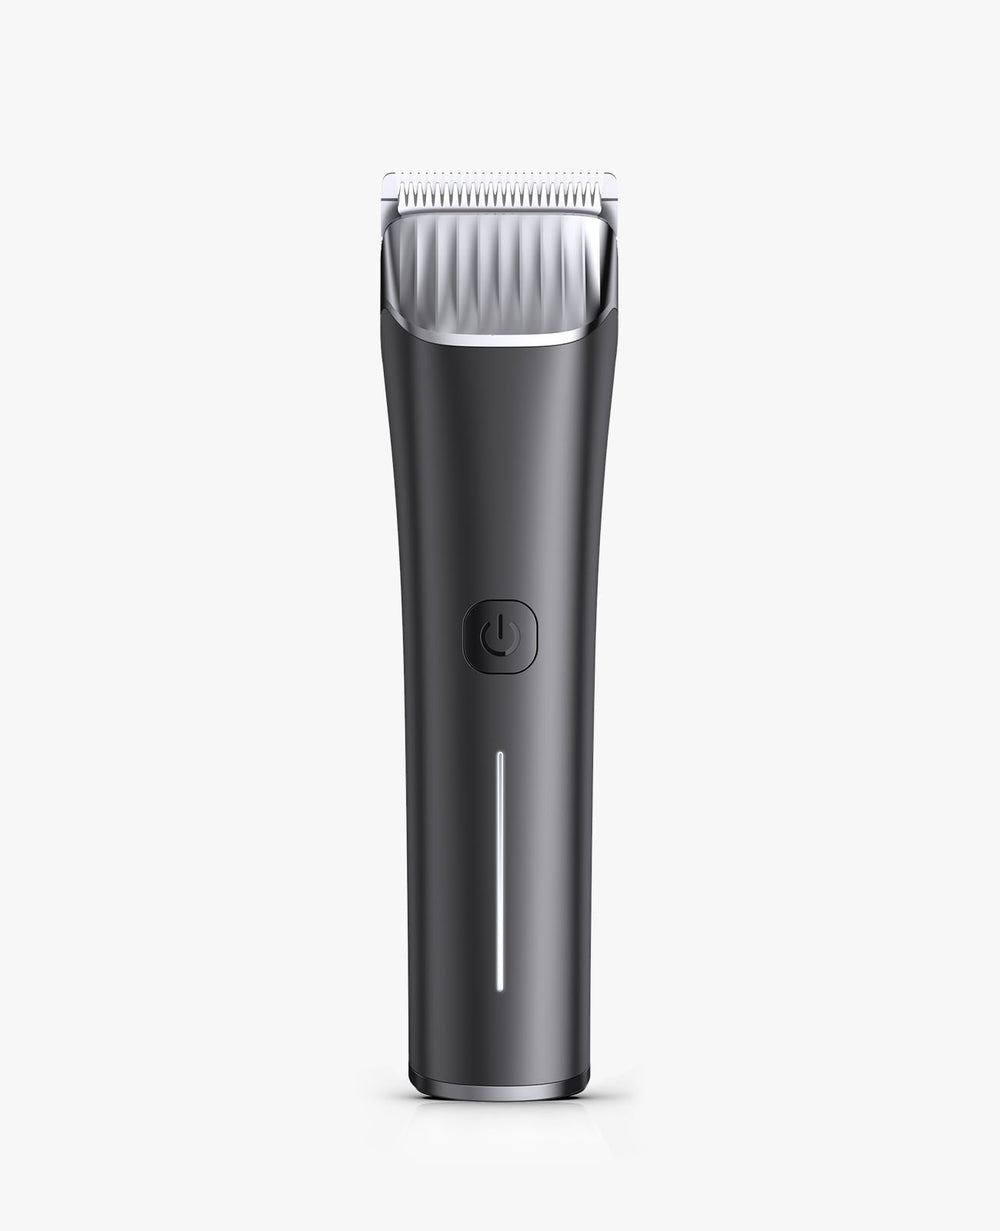 RK034 - Oneisall Cat Grooming Clippers